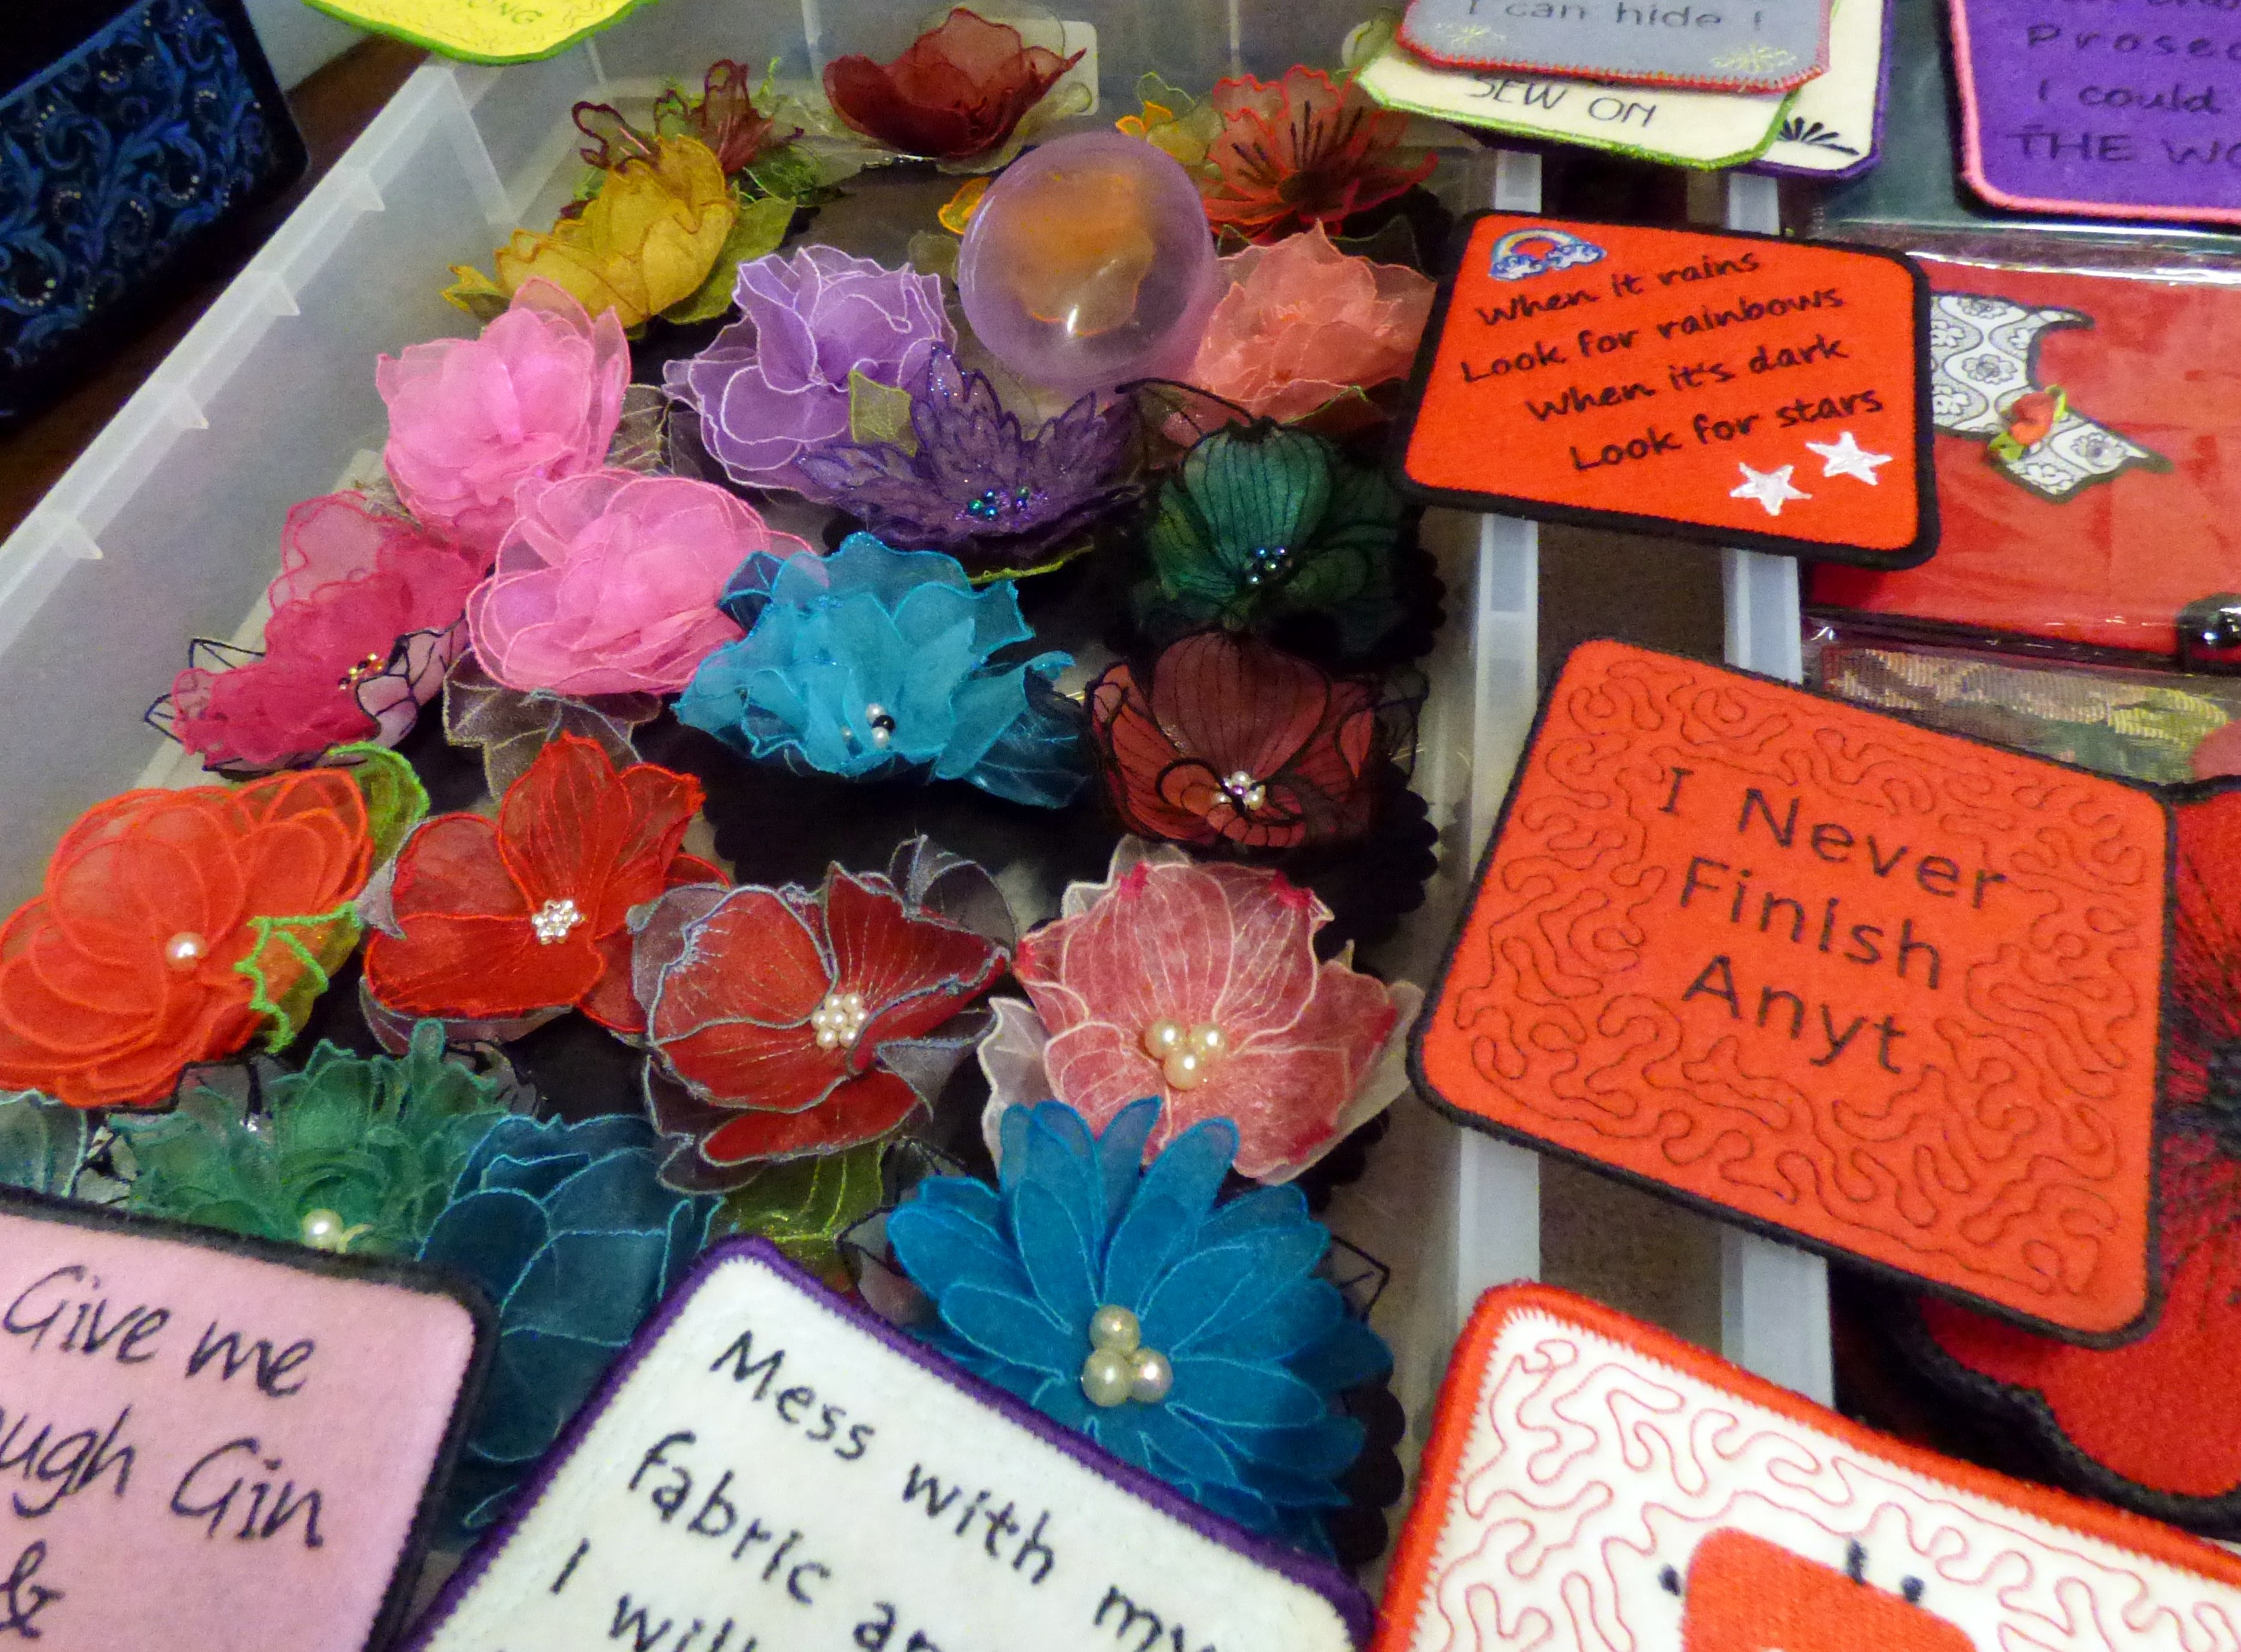 fabric flowers made by Eileen Clark, Talk by members of Cheshire Borders branch @ MEG 2019